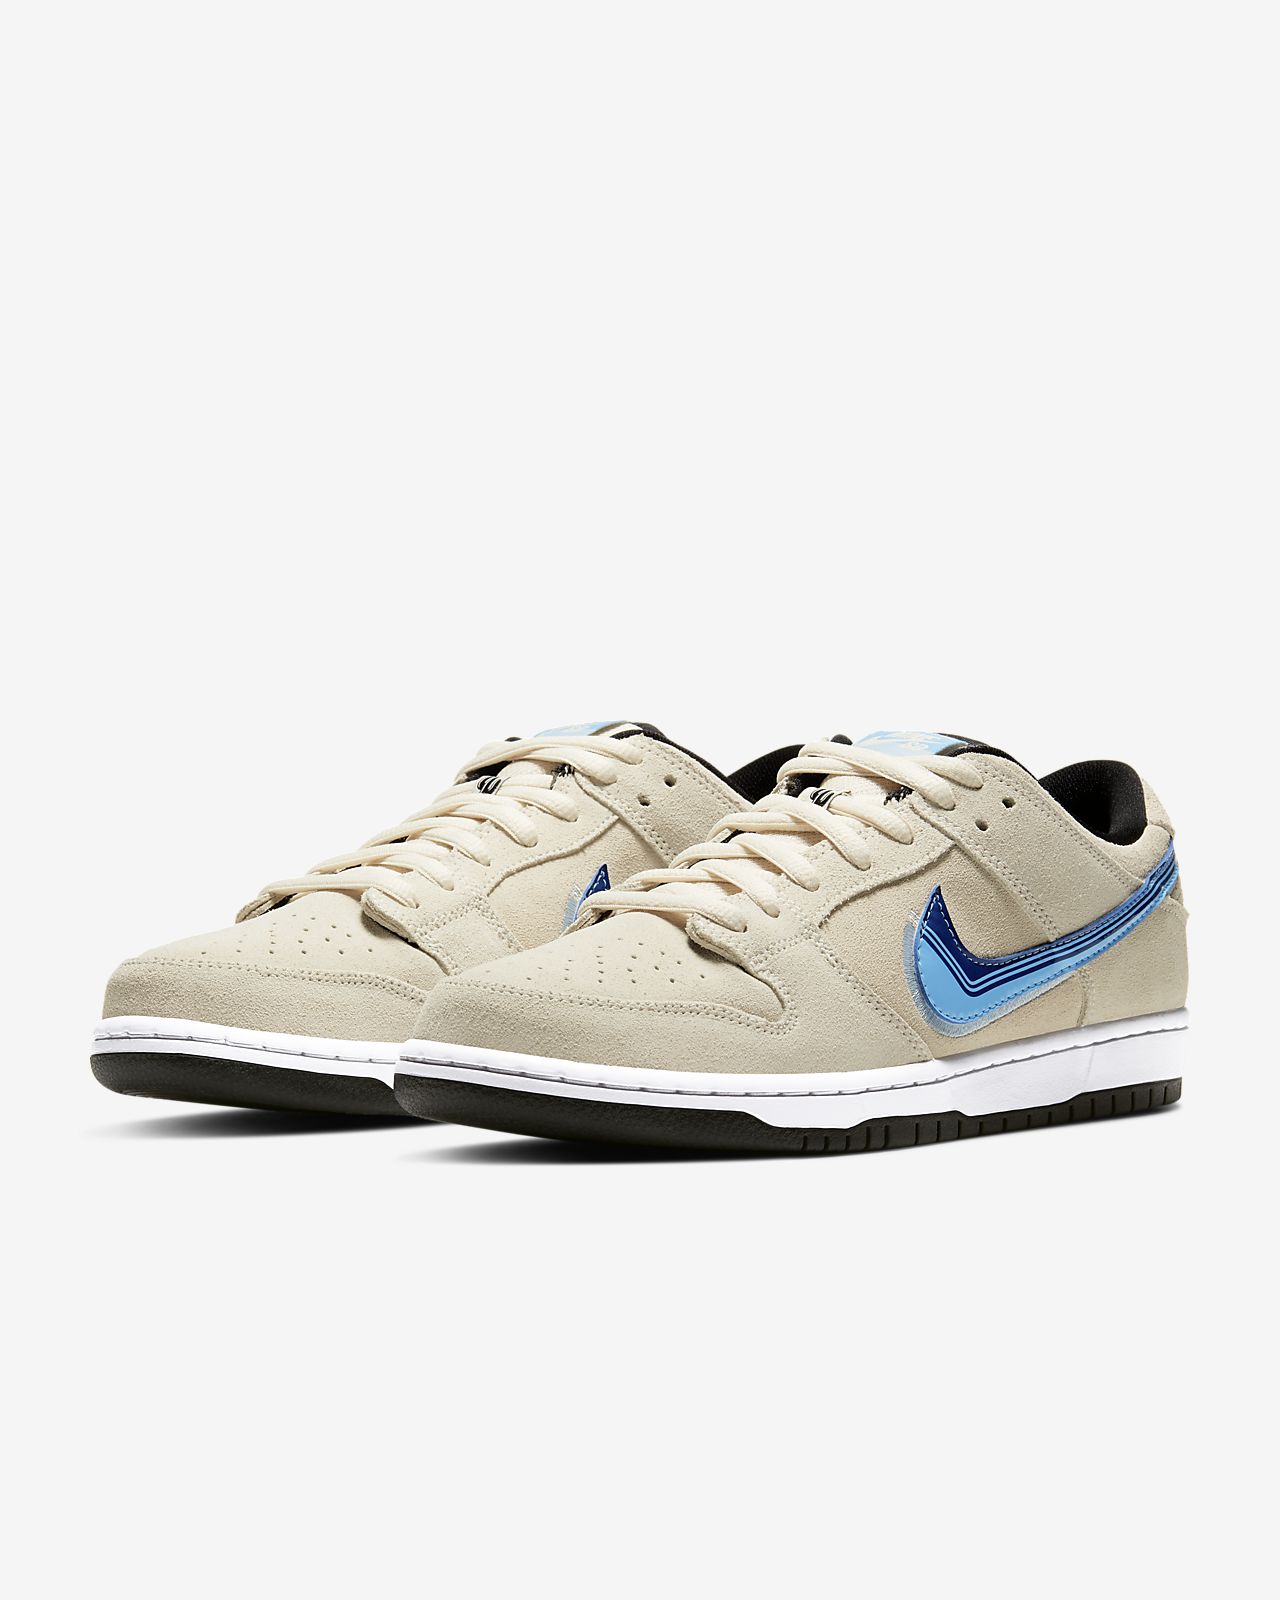 Nike Official Nike Sb Dunk Low Pro Skate Shoe Online Store Mail